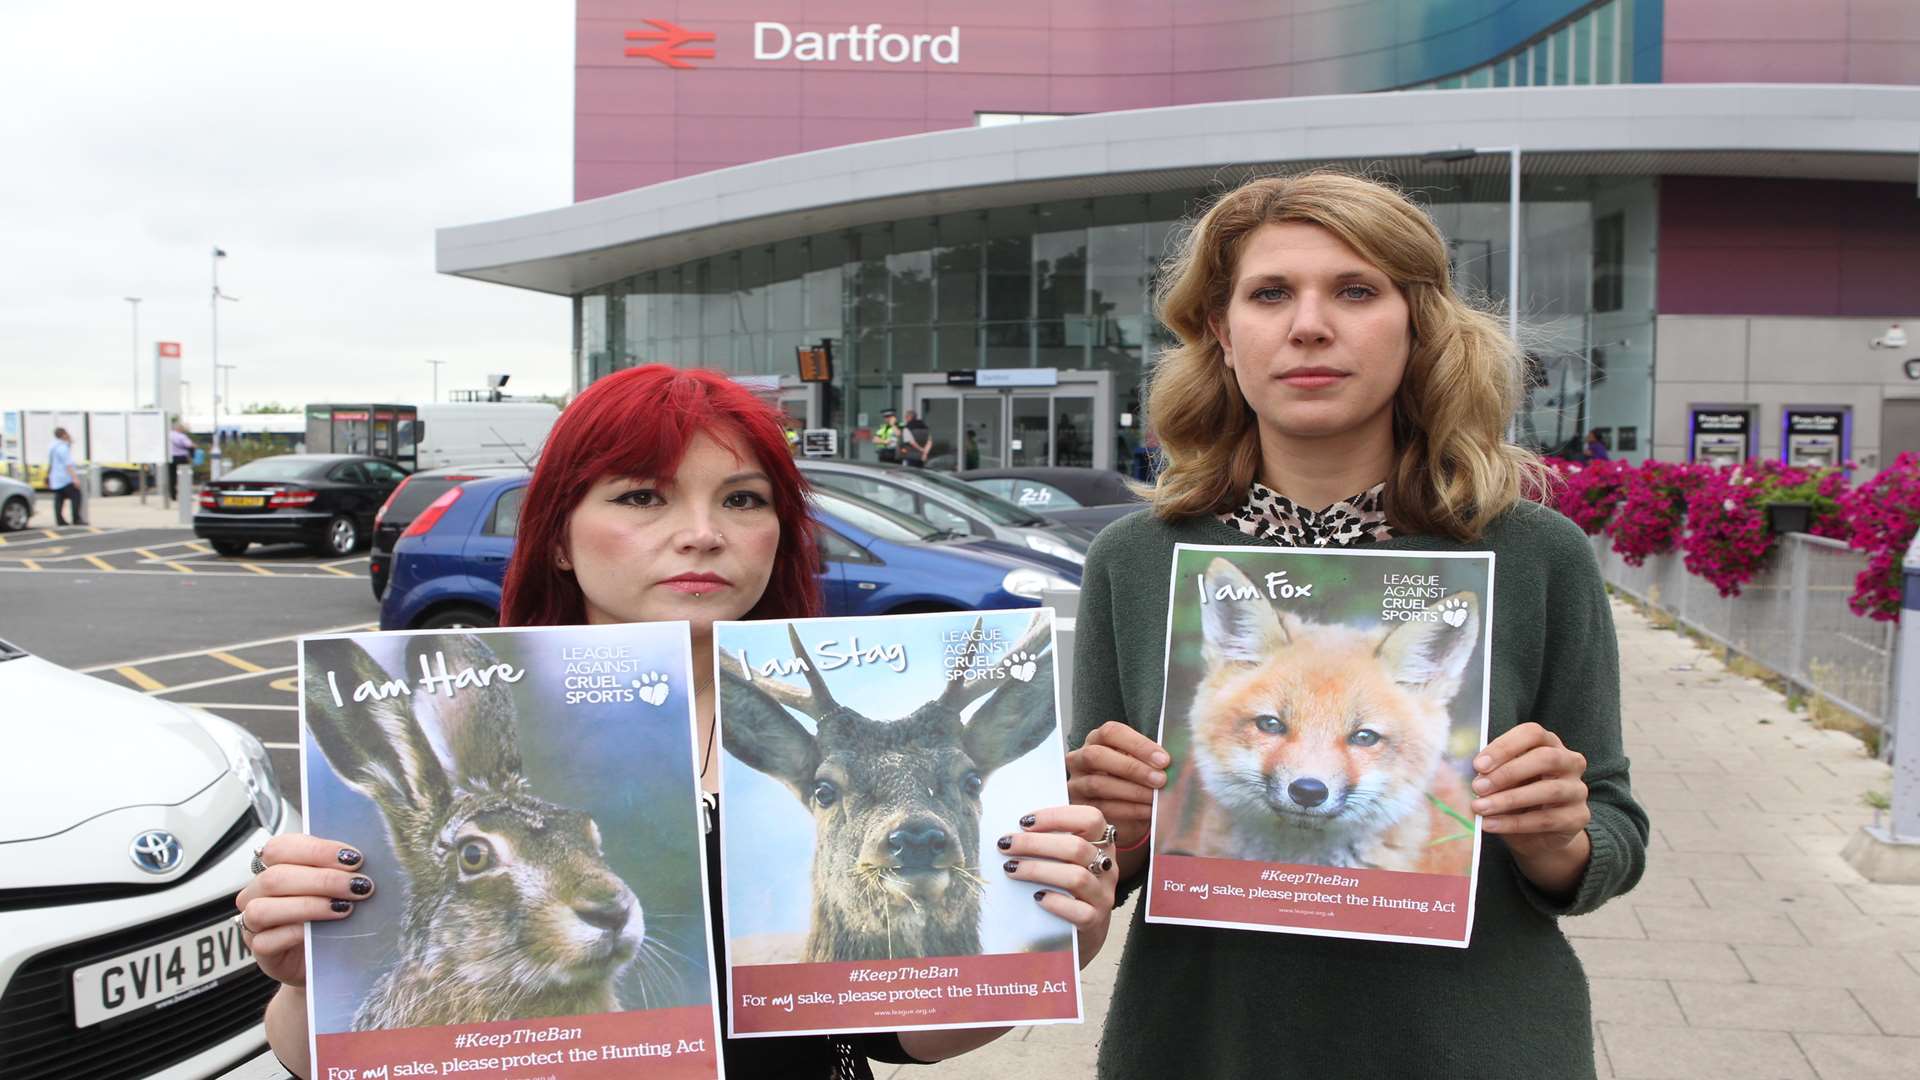 Ant-hunt campaigners Natalie Boorman and Sarah O'Rourke outside Dartford station